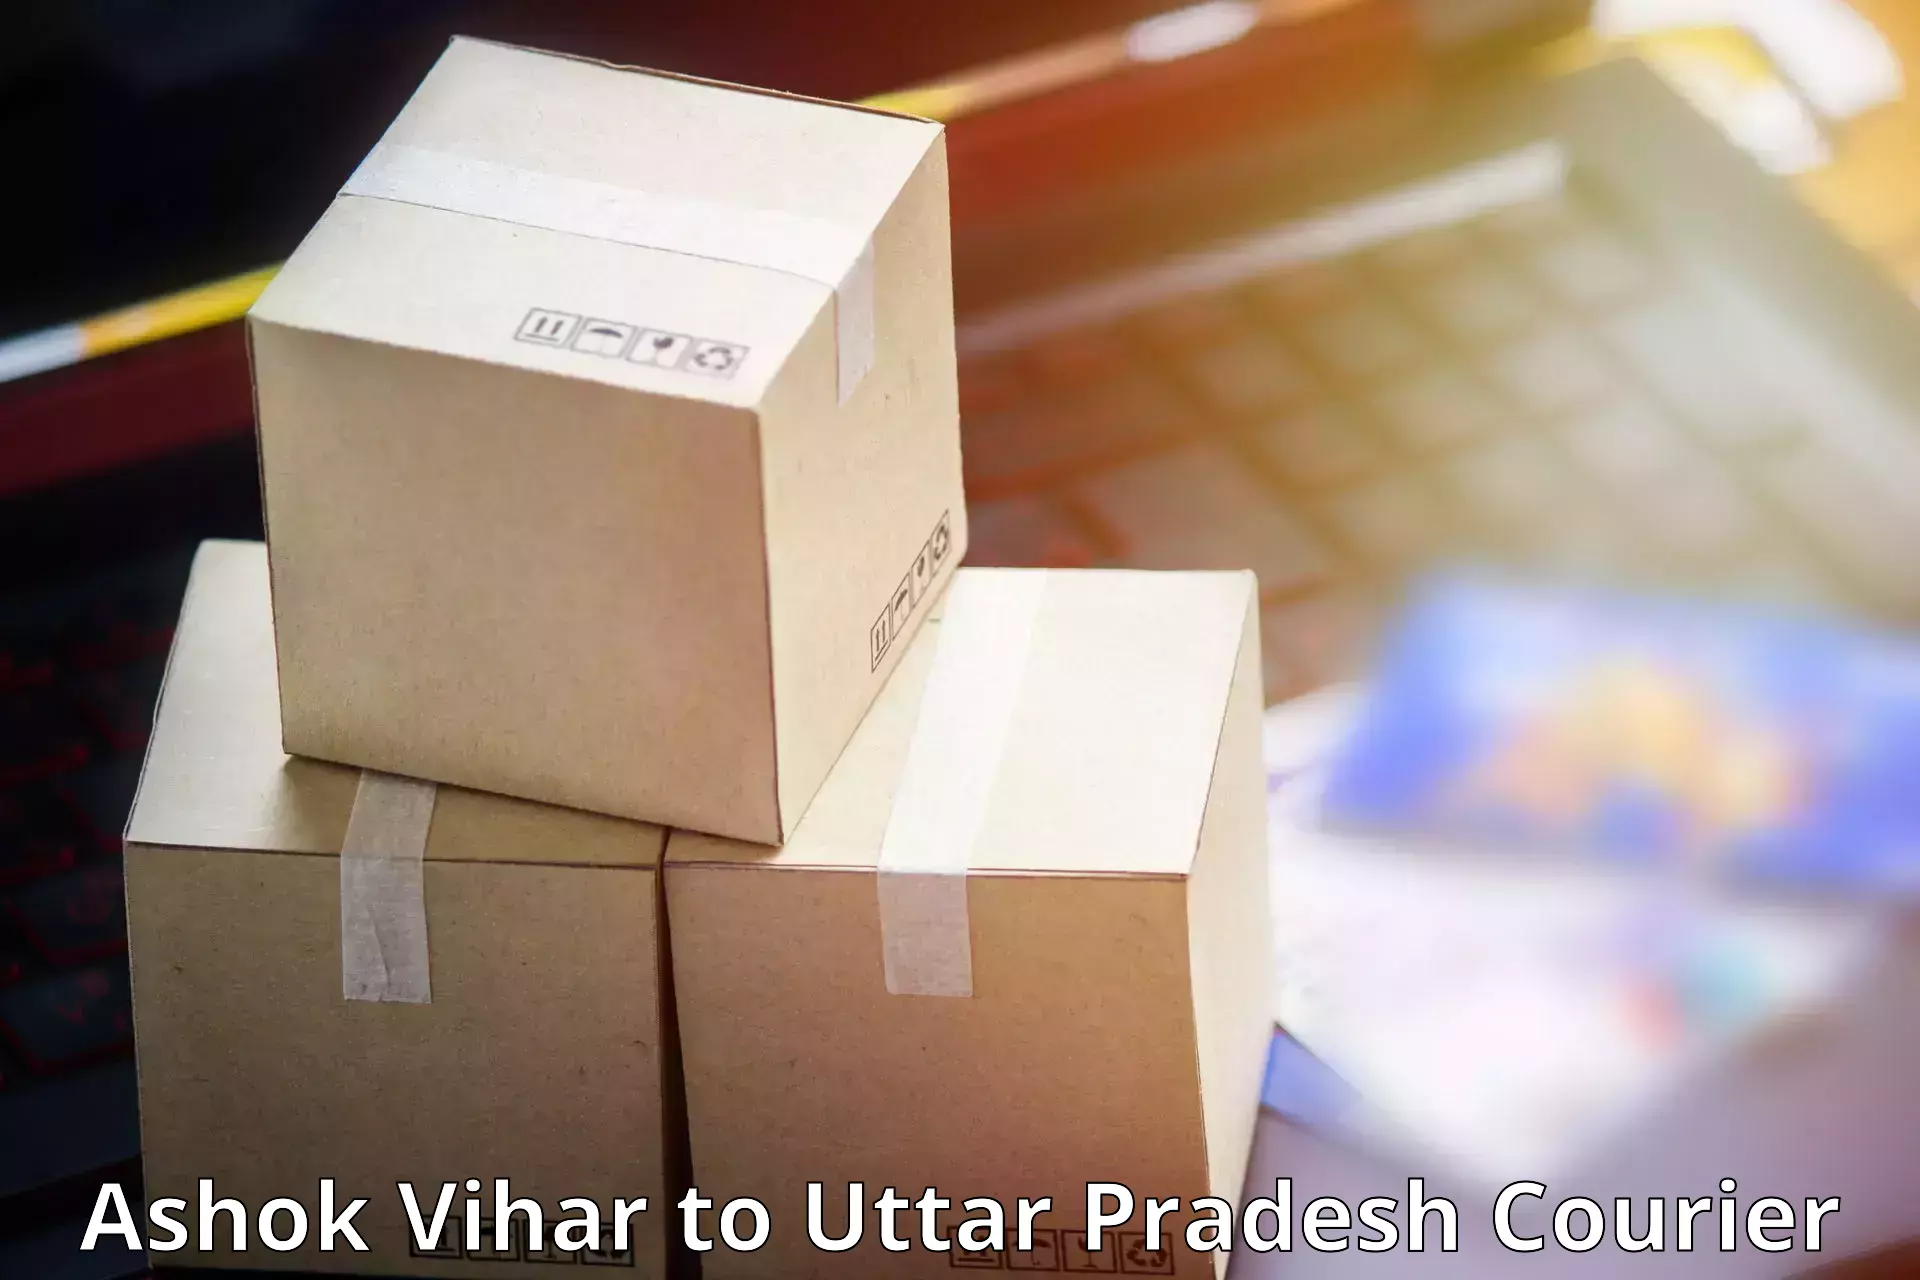 Online courier booking Ashok Vihar to Farrukhabad